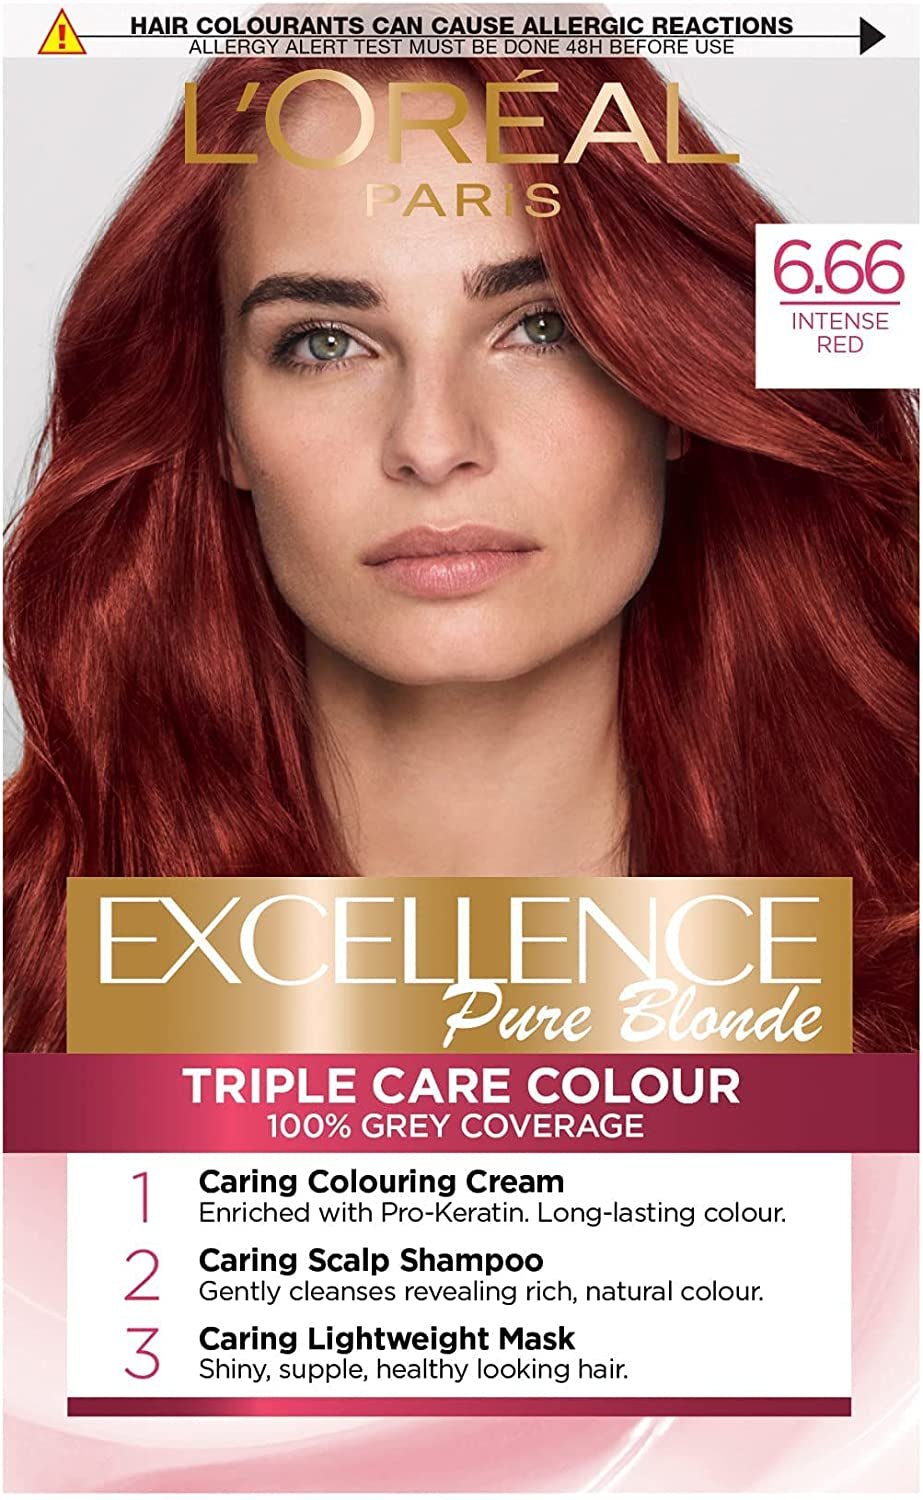 L'Oreal Paris Excellence Crème Permanent Hair Dye, up to 100% Grey Hair Coverage, Natural-Looking Hair Colour Result, Red Hair Dye 6.66 Intense Red - FoxMart™️ - L'Oréal